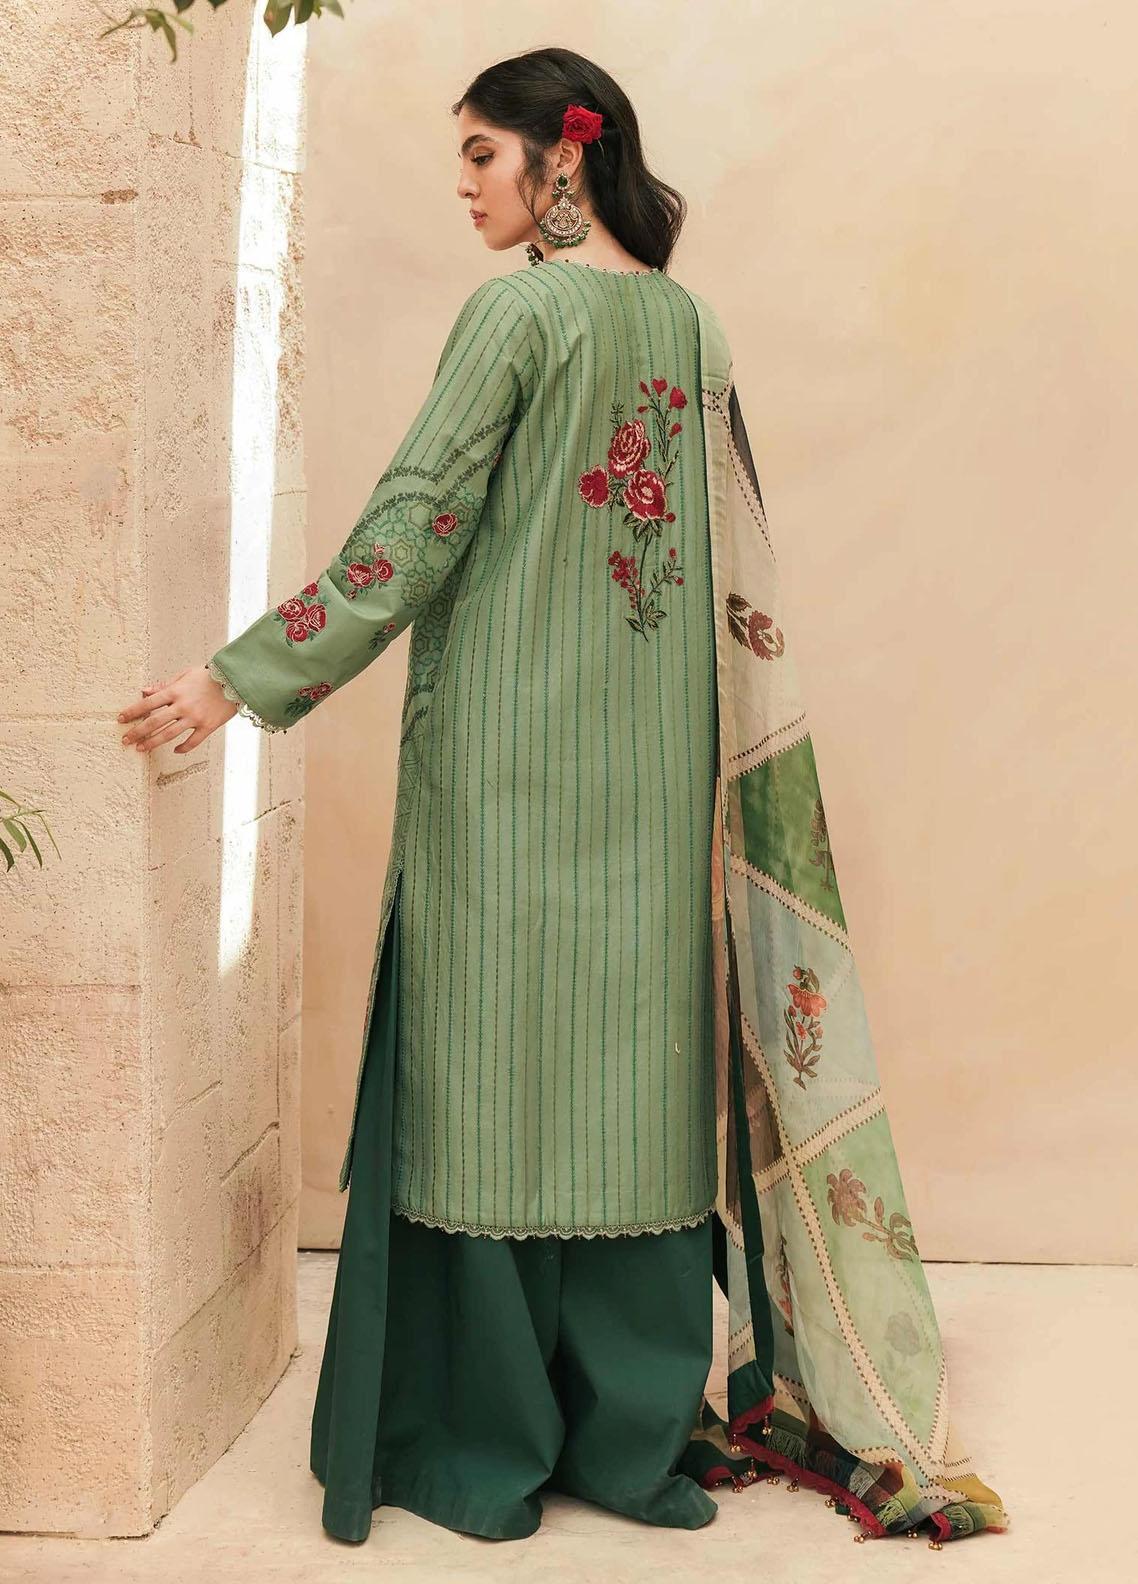 Zara Shahjahan Embroidered Lawn Suit Unstitched 3 Piece 08 SIRAJ ZSL22 – Summer Collection